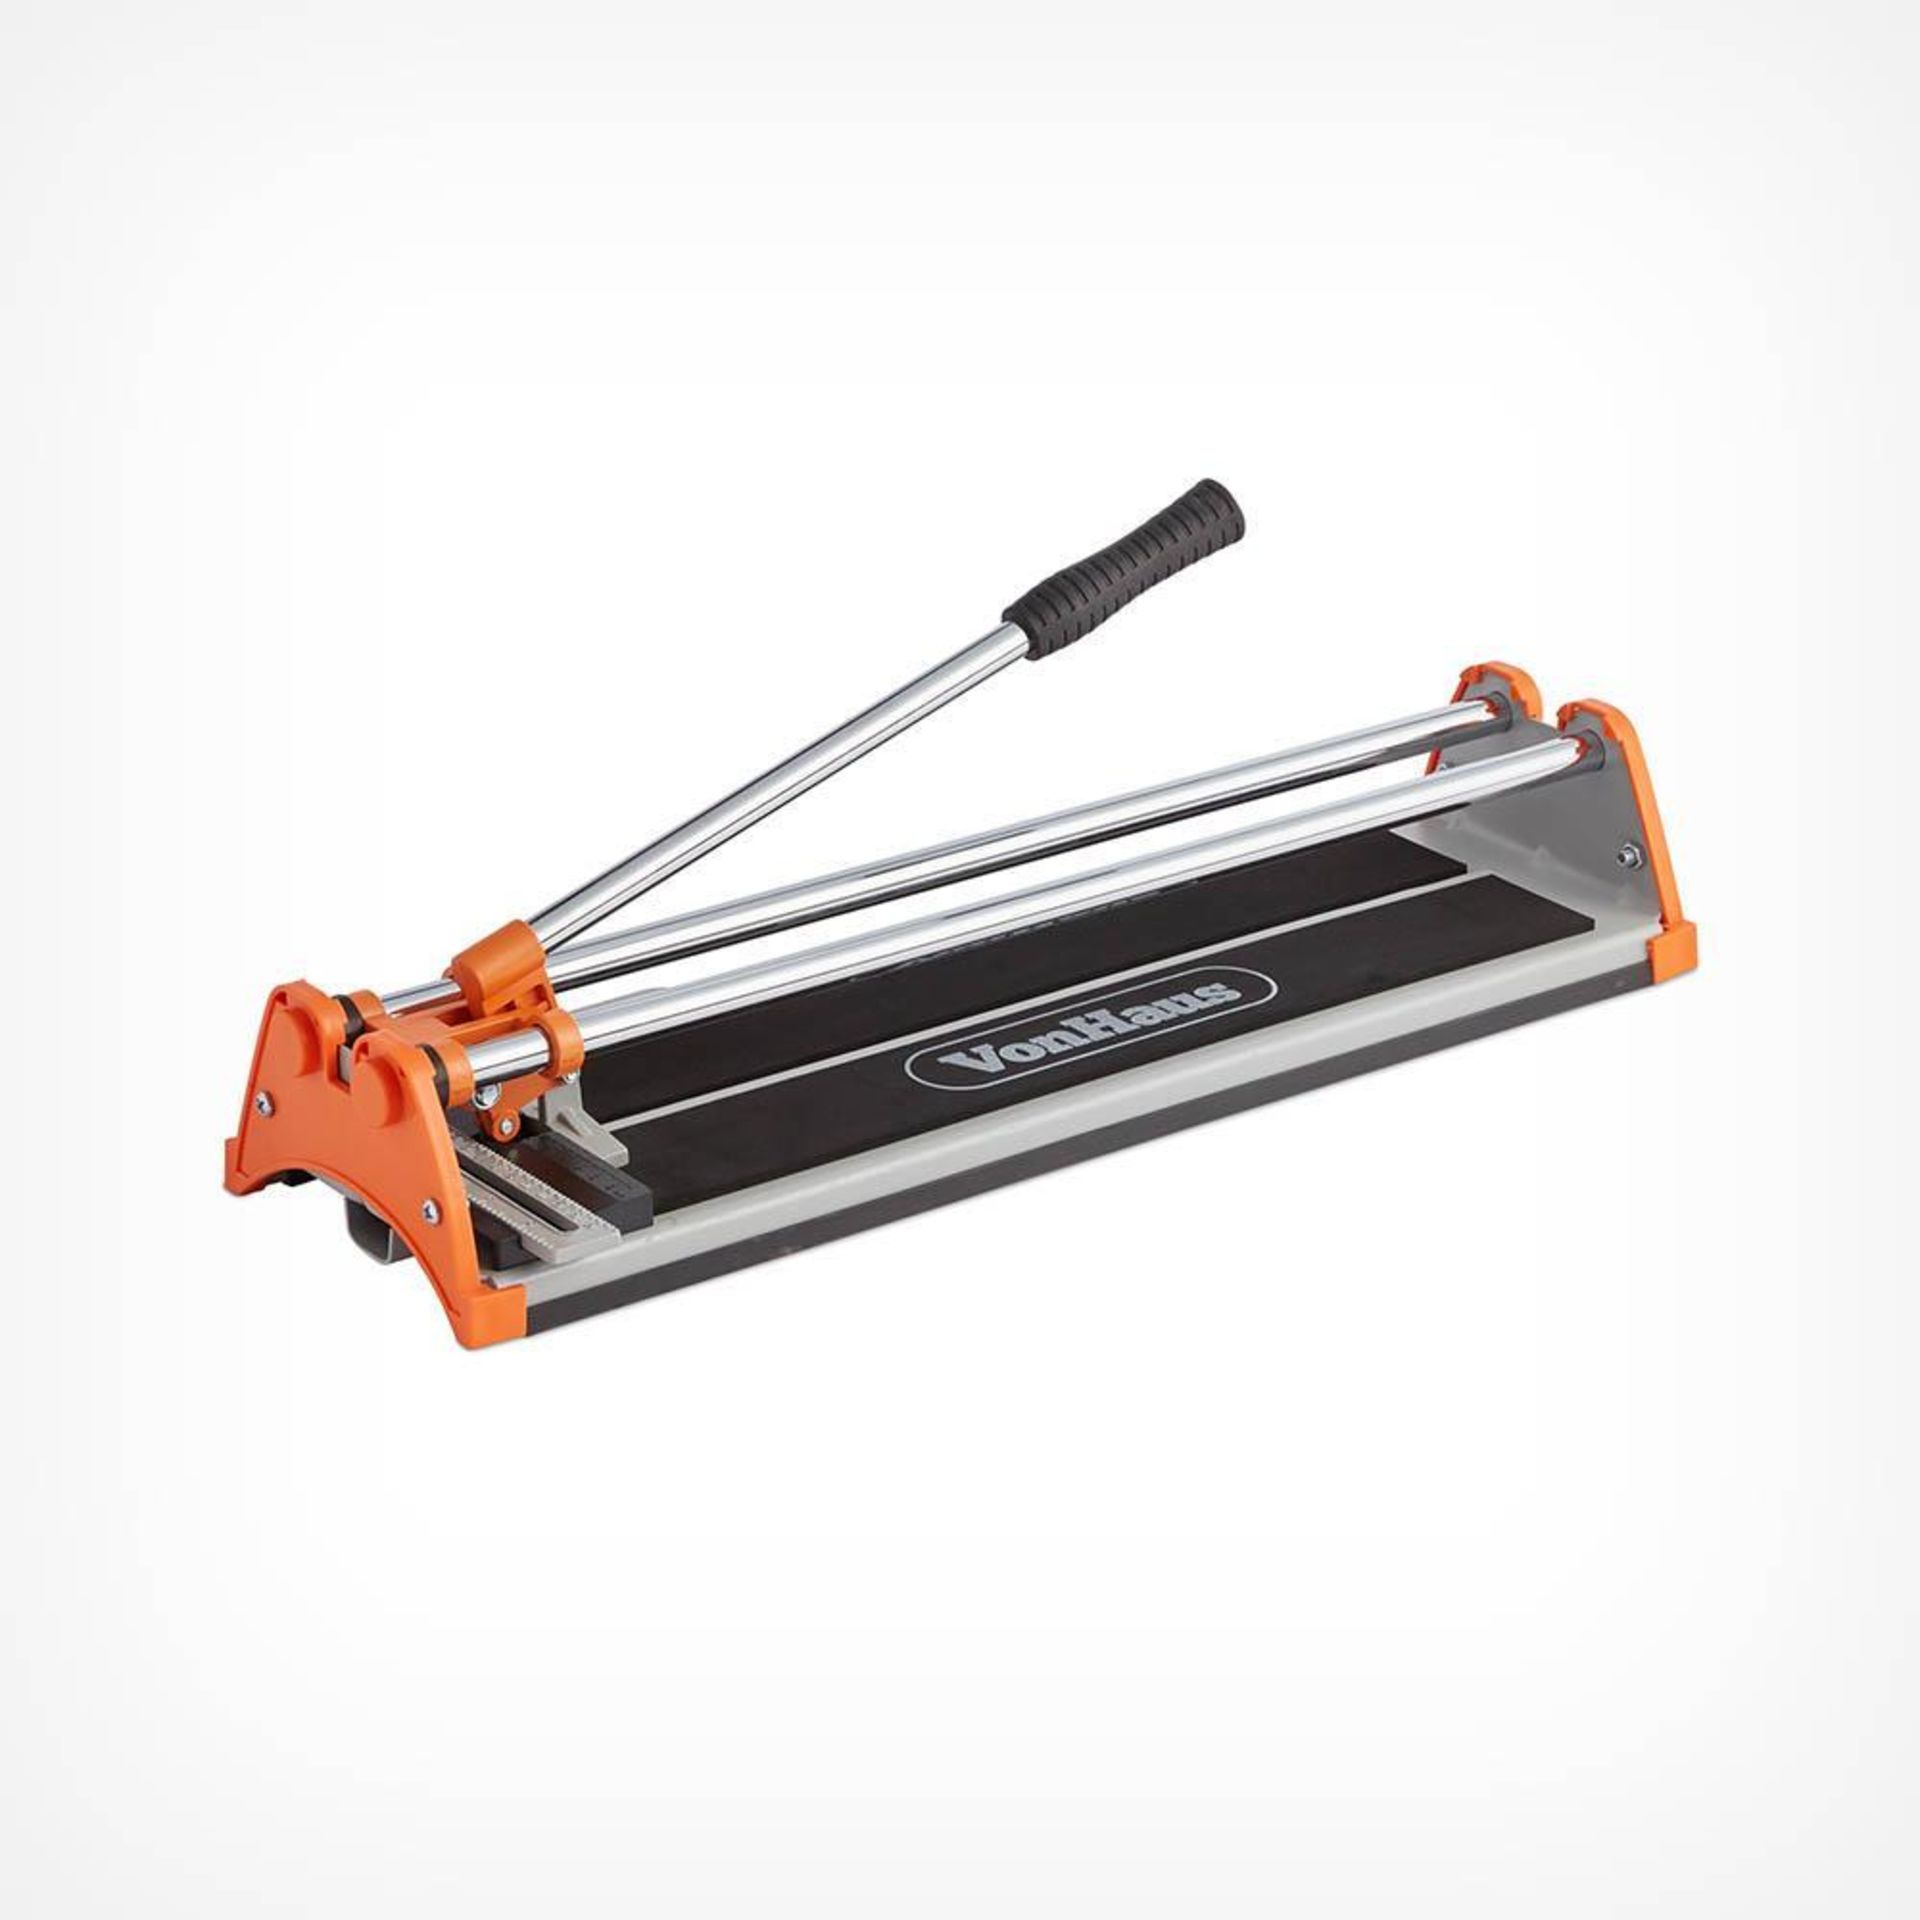 Manual Tile Cutter 430mm - P2. With its compact size, intuitive design and simple operation, this